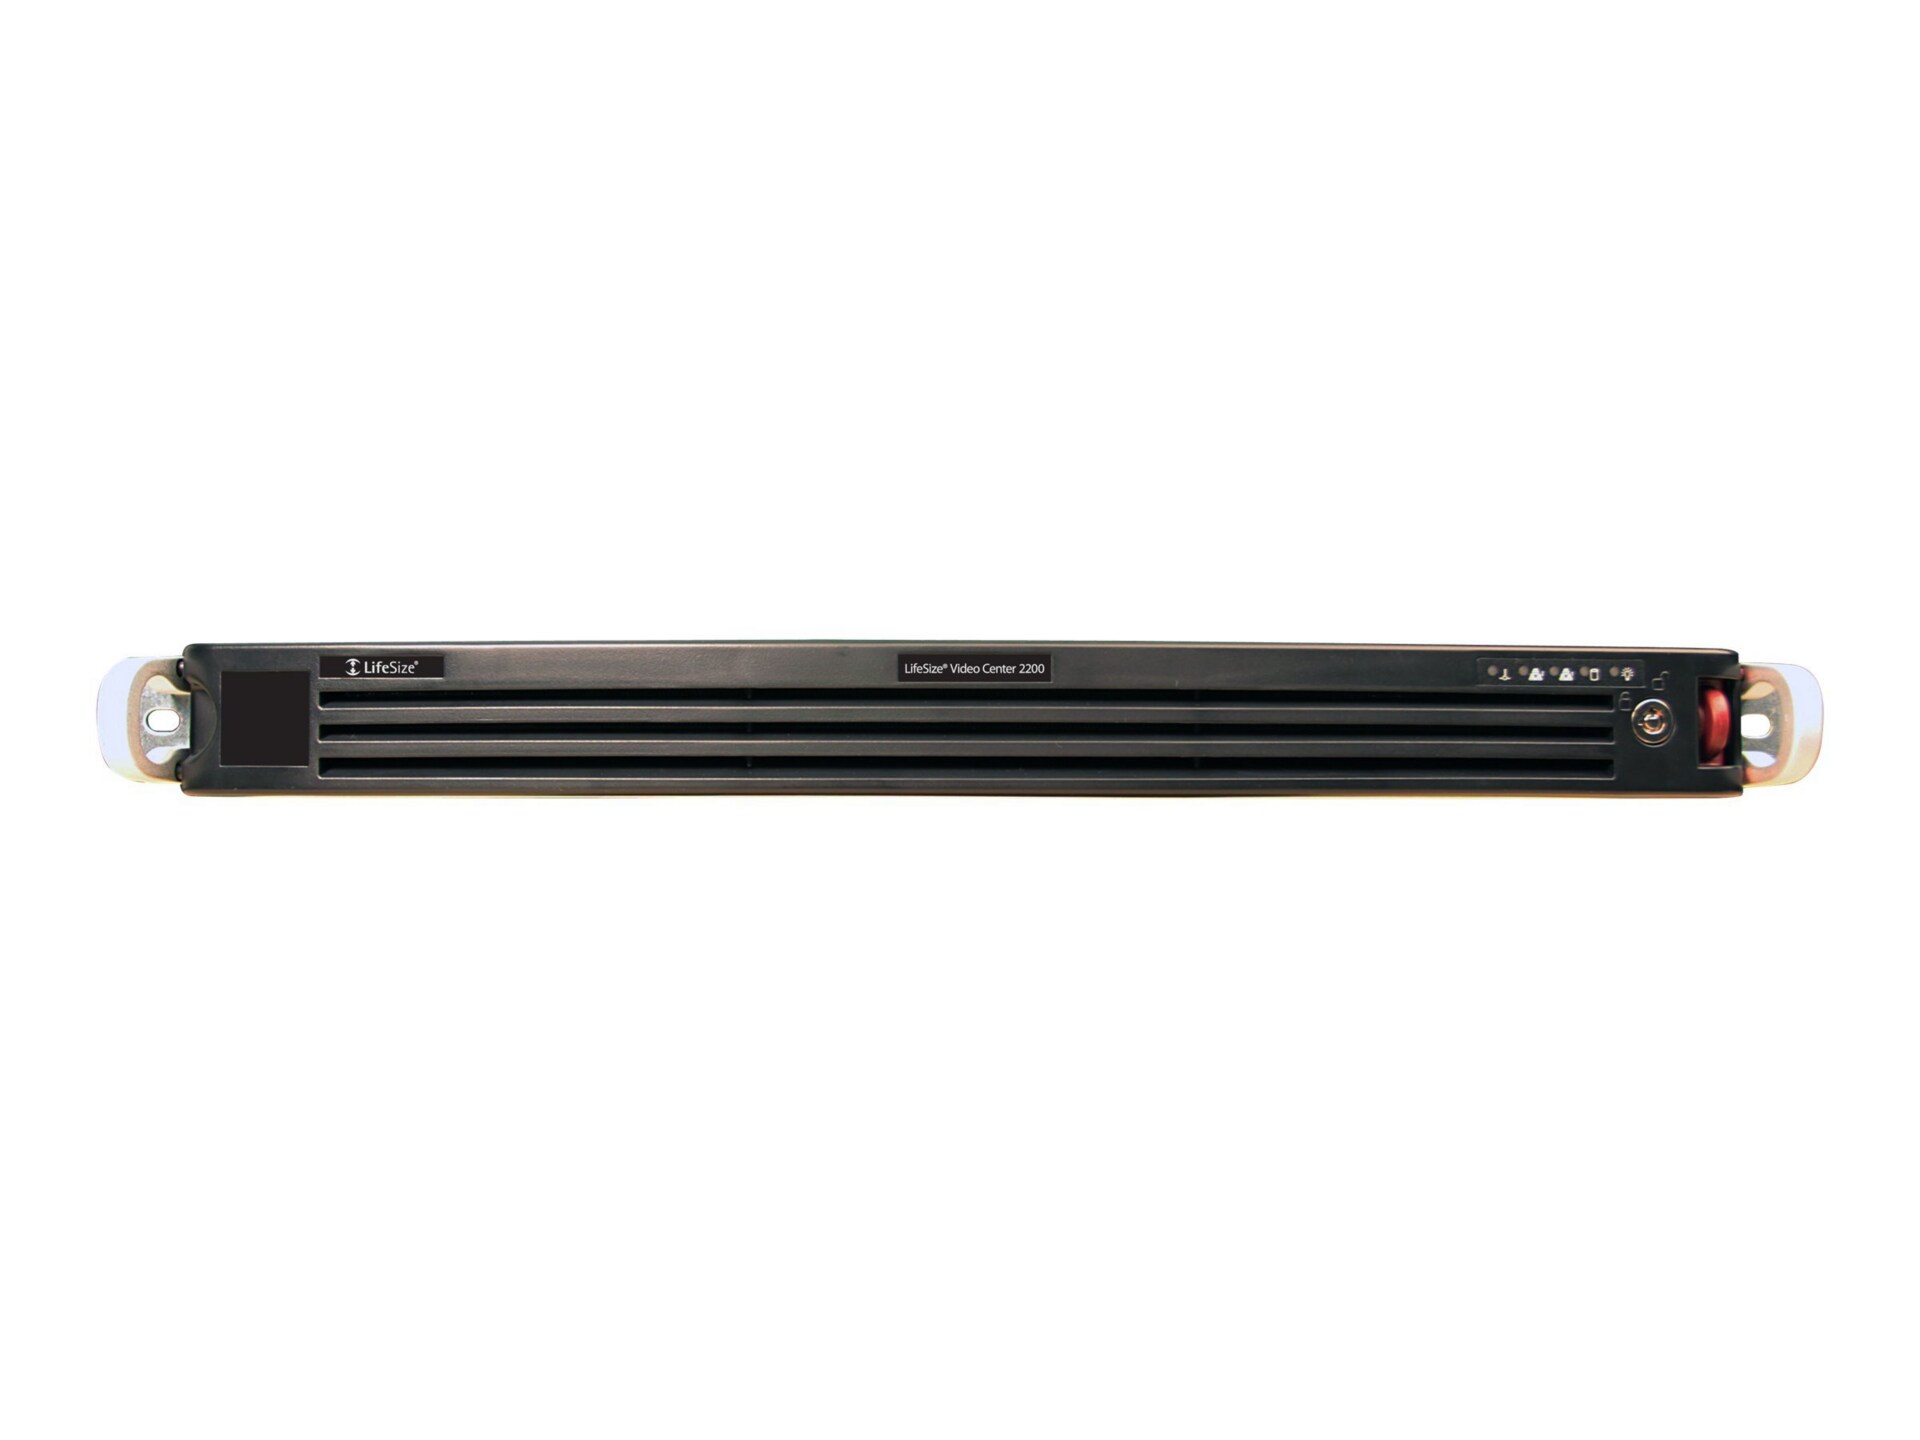 Lifesize Video Center 2200 HD - video conferencing device